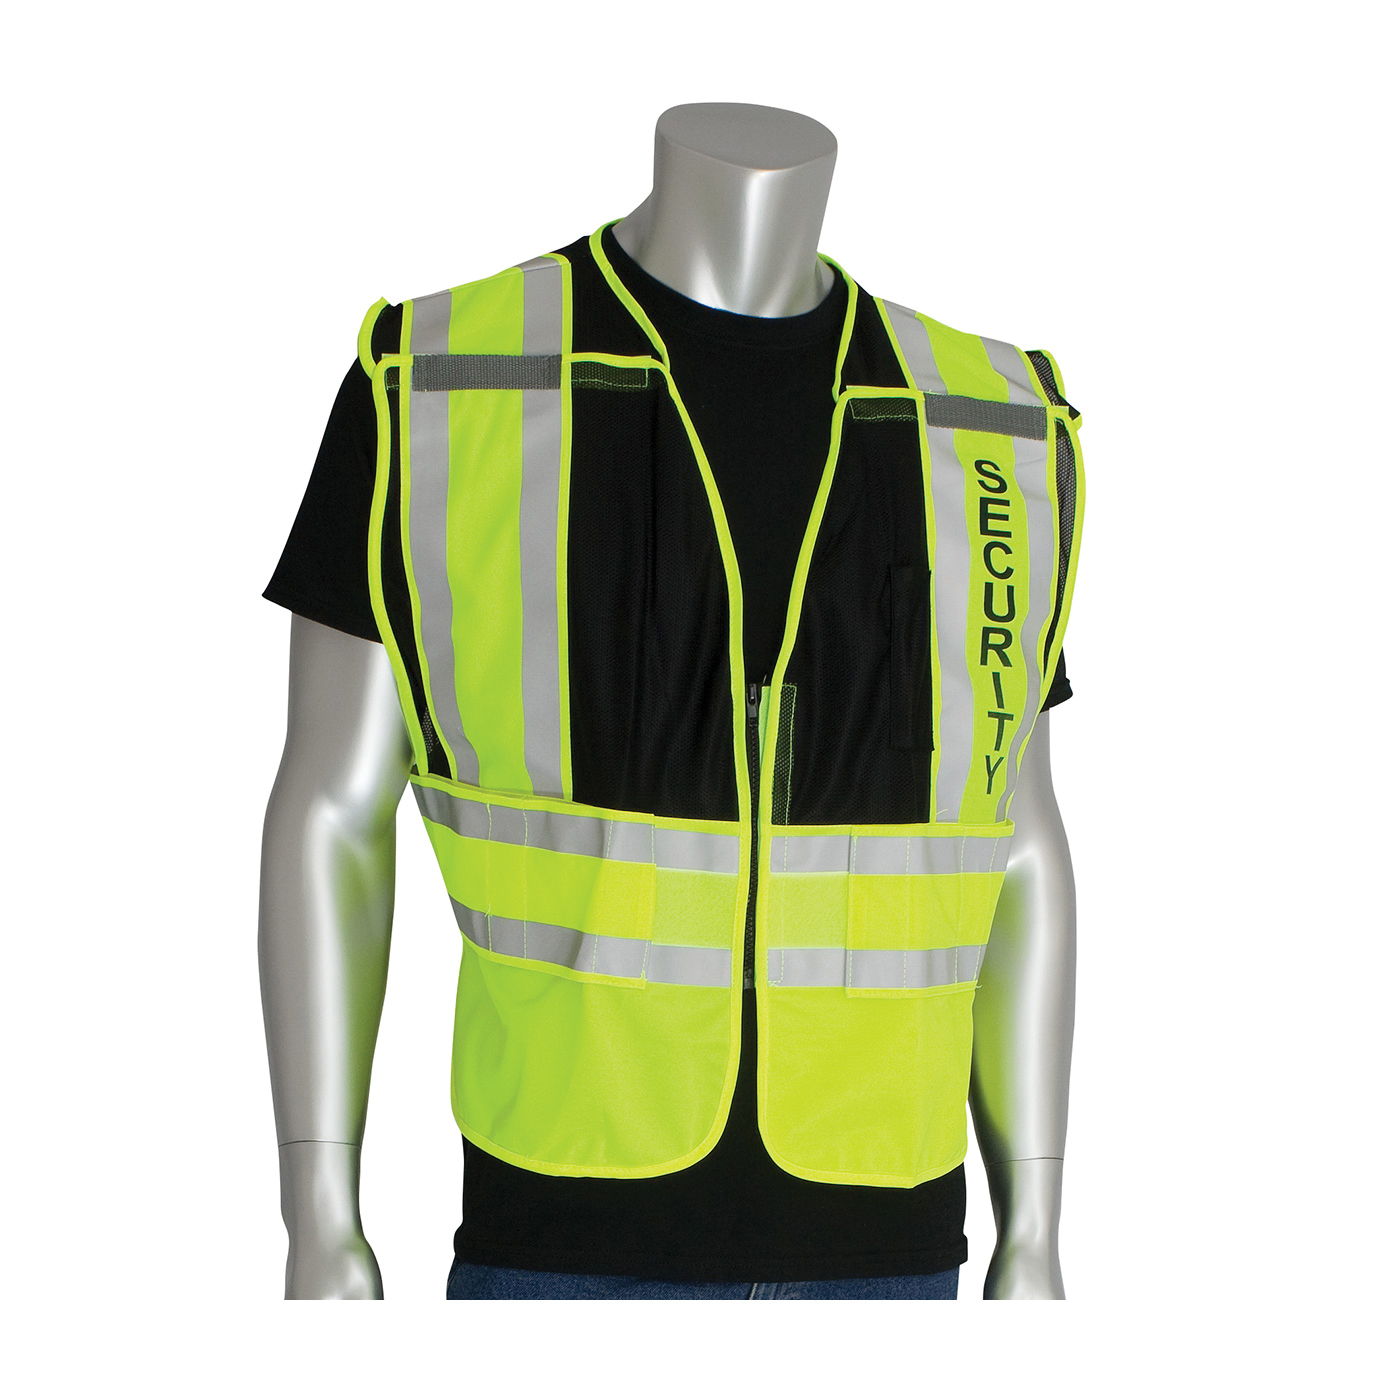 PIP® 302-PSV-BLK-M/XL Public Safety Vest With SECURITY Logo, M/XL, Hi-Viz Lime Yellow/Black, Polyester, Zipper Closure, 2 Pockets, ANSI Class: Class 2, Specifications Met: ANSI 107 Type P